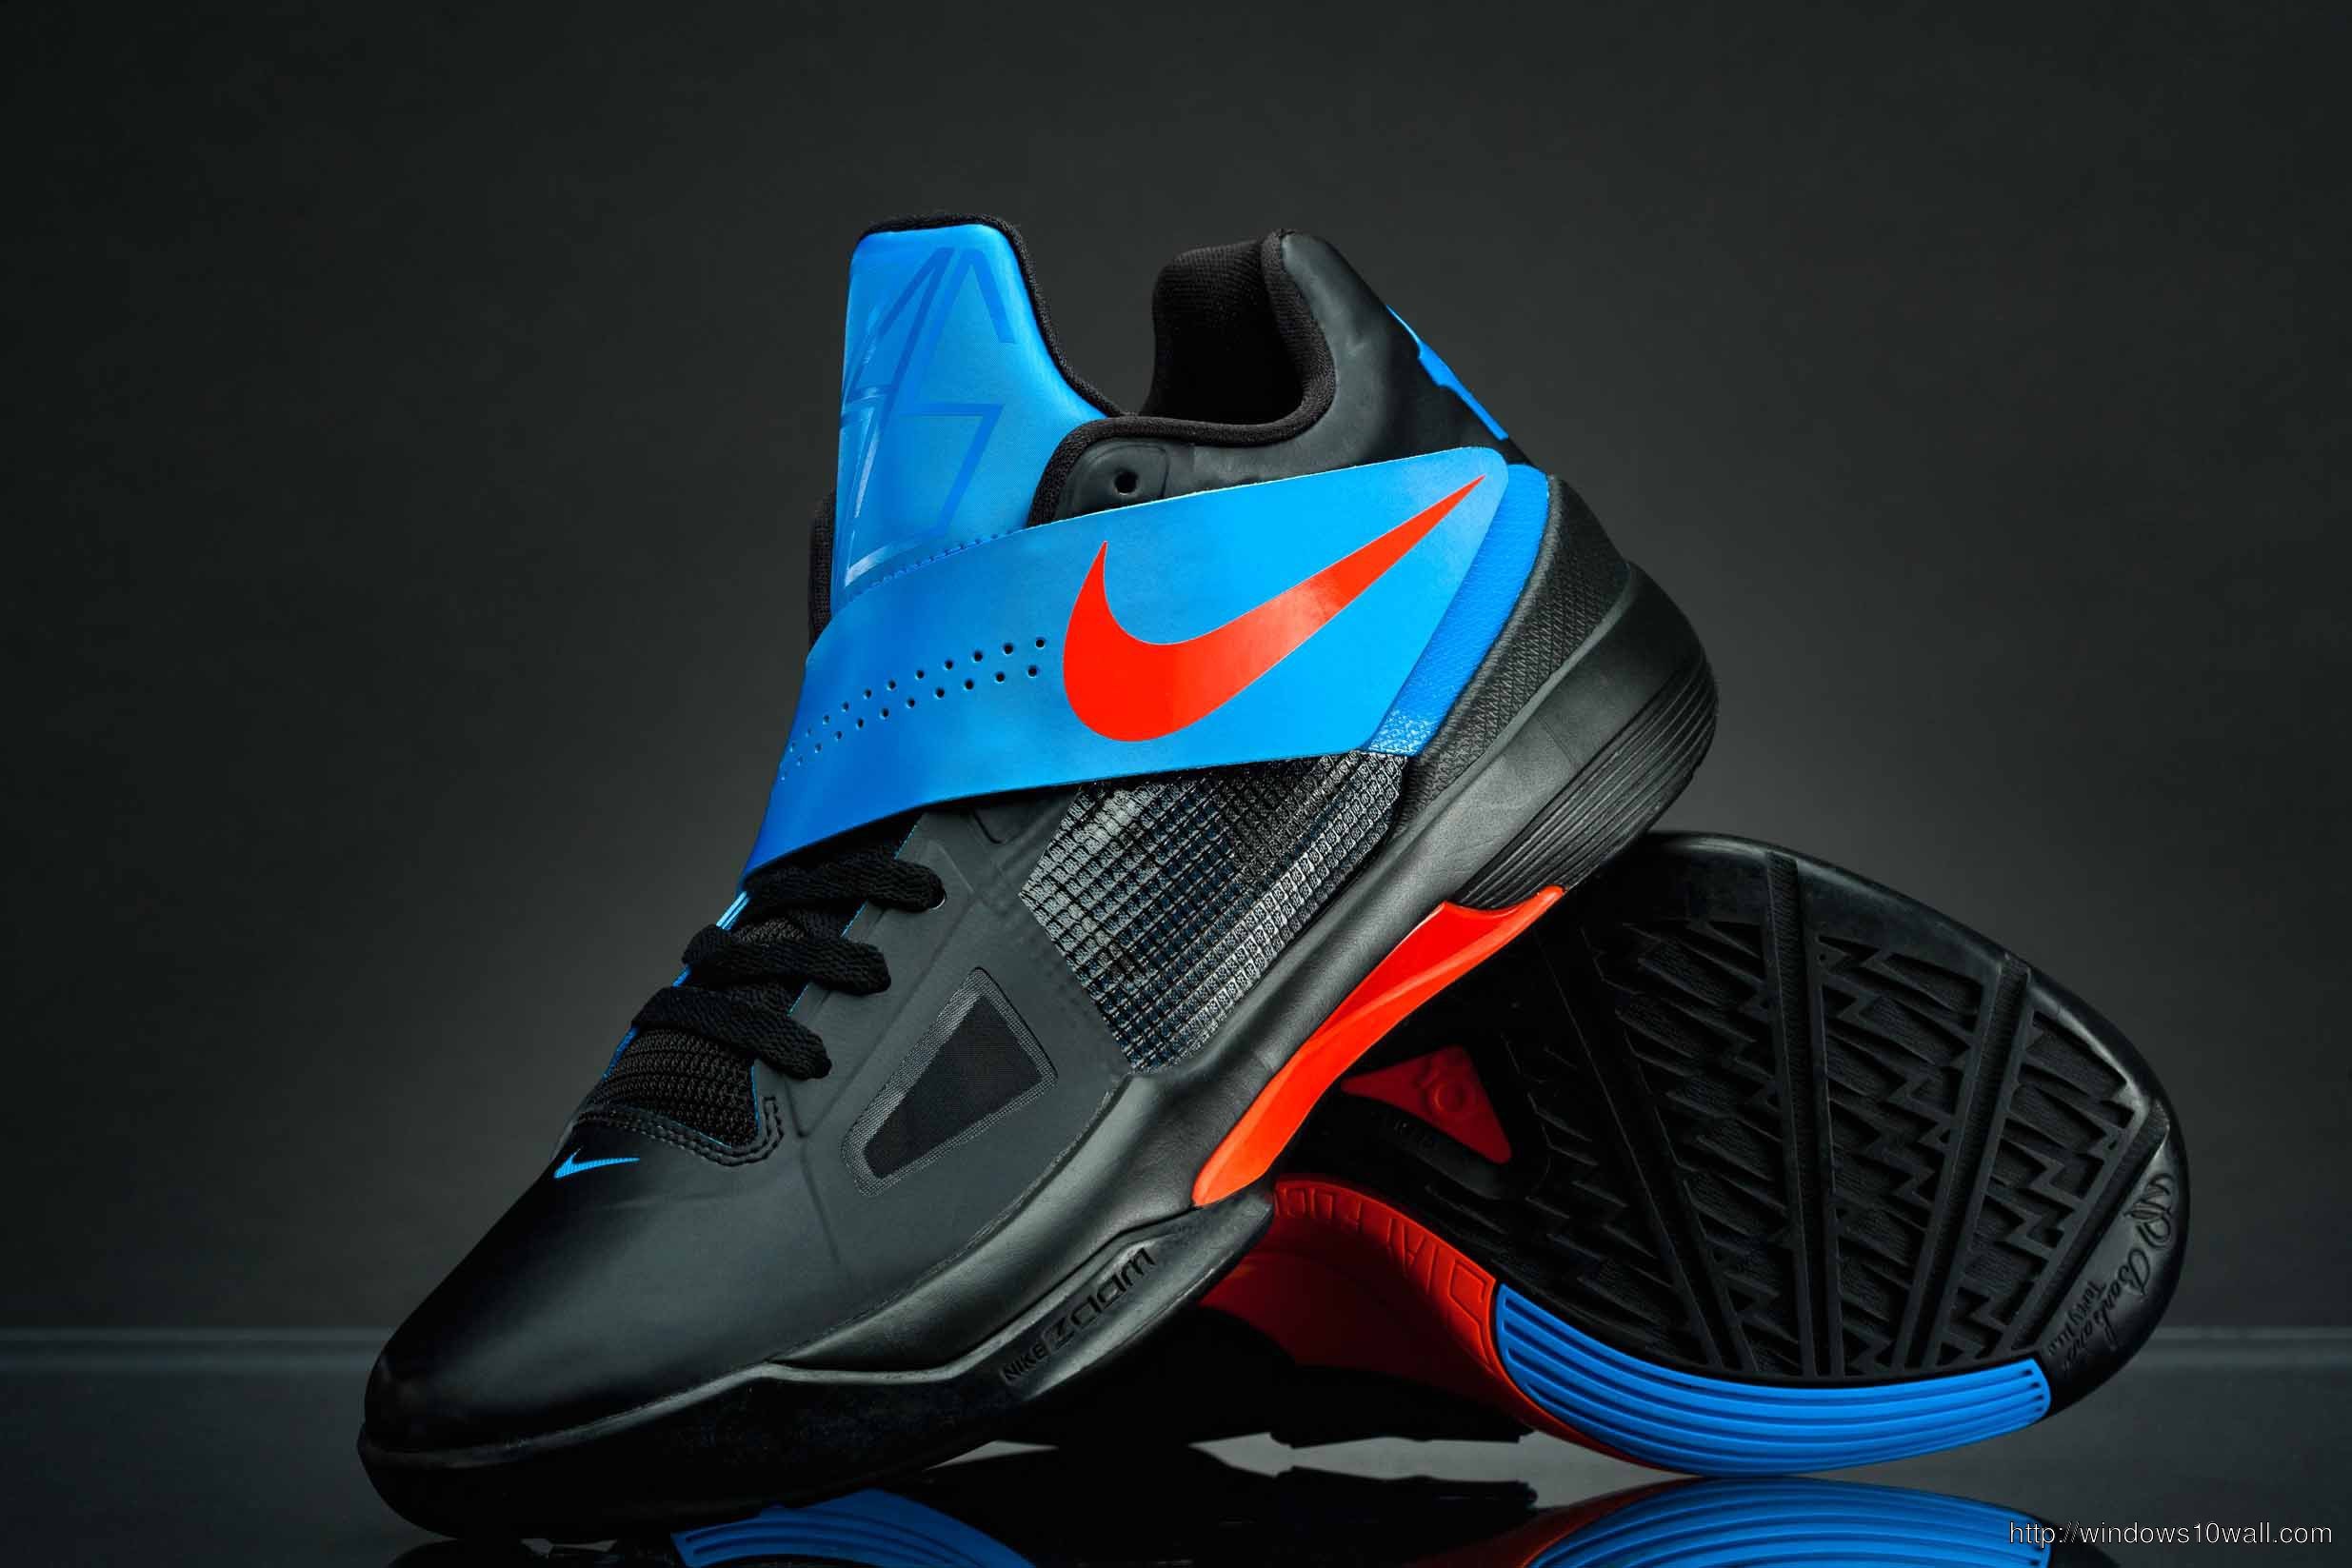 Kd Shoes Wallpapers Wallpapertag Images, Photos, Reviews